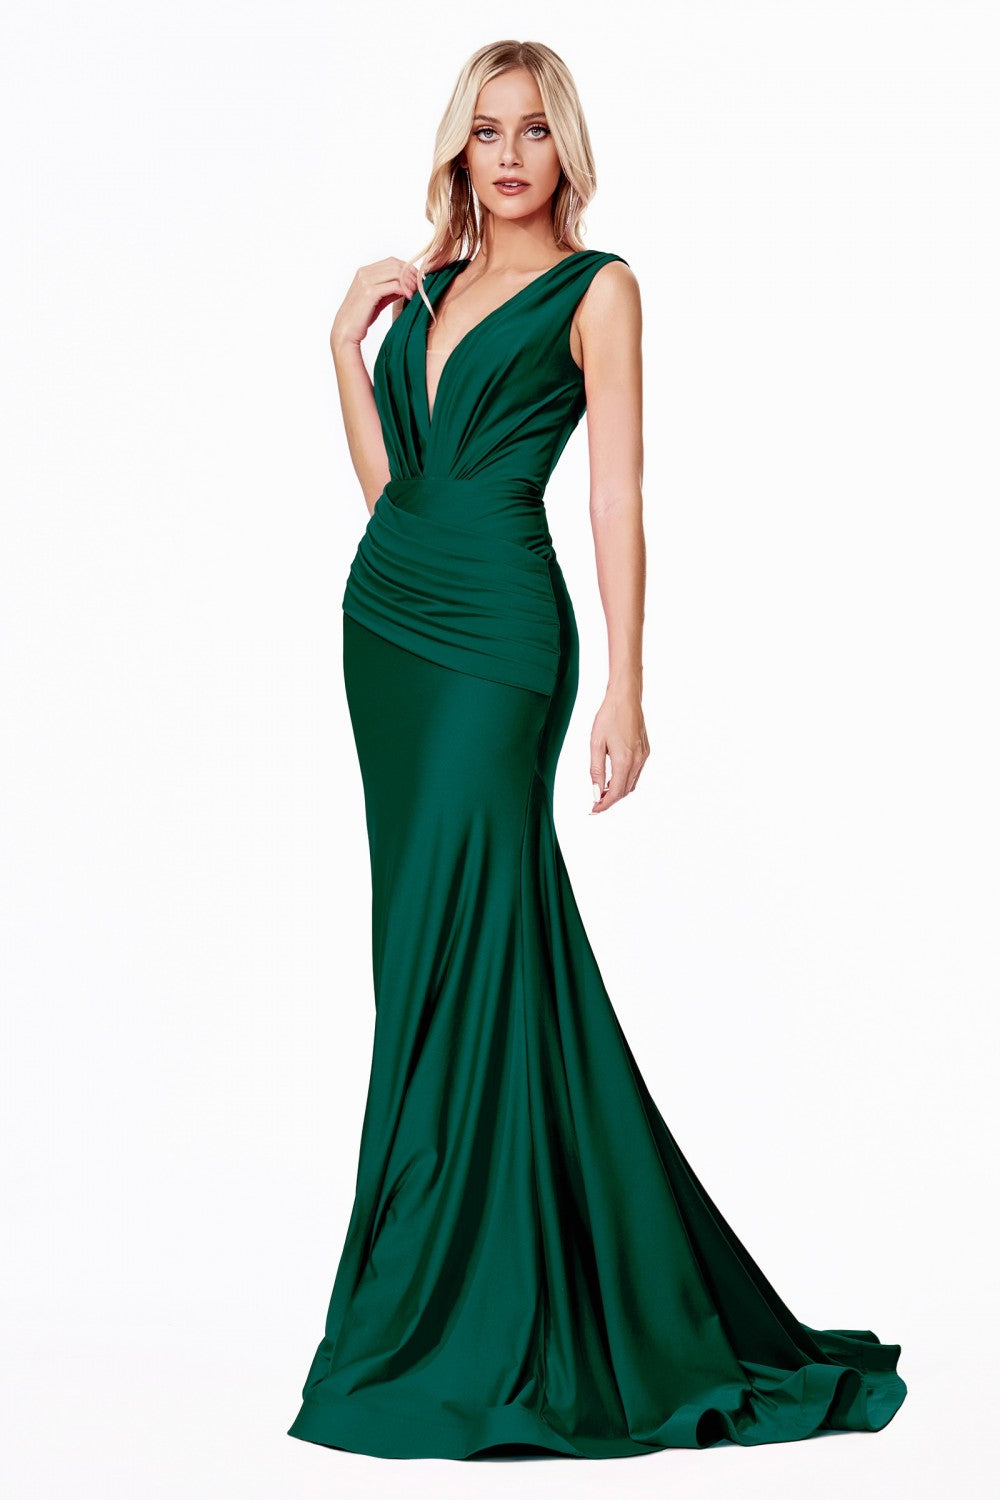 Stretch Jersey Evening Gown Formal Moder Mermaid Style Draped Bodice and Fitted Waist CDCD912 Elsy Style Mother of the Bride Dress